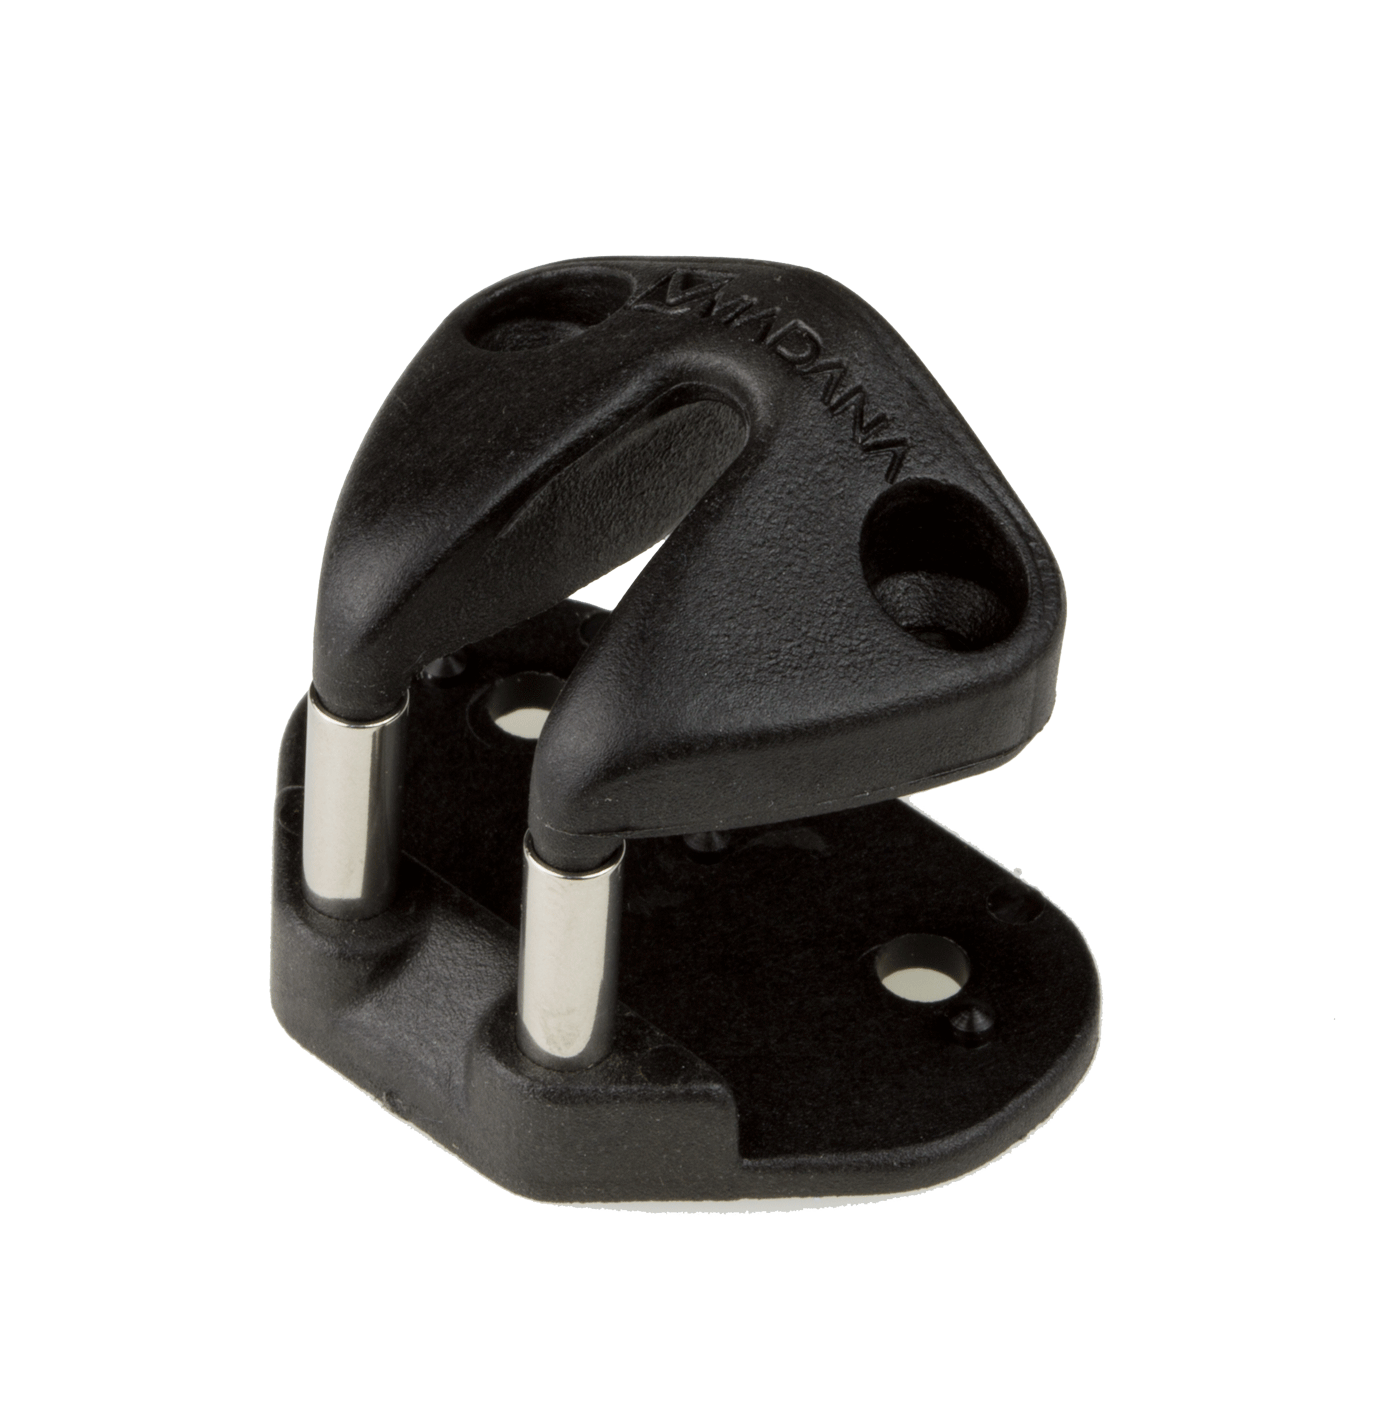 Complete guide for 27mm cam cleat